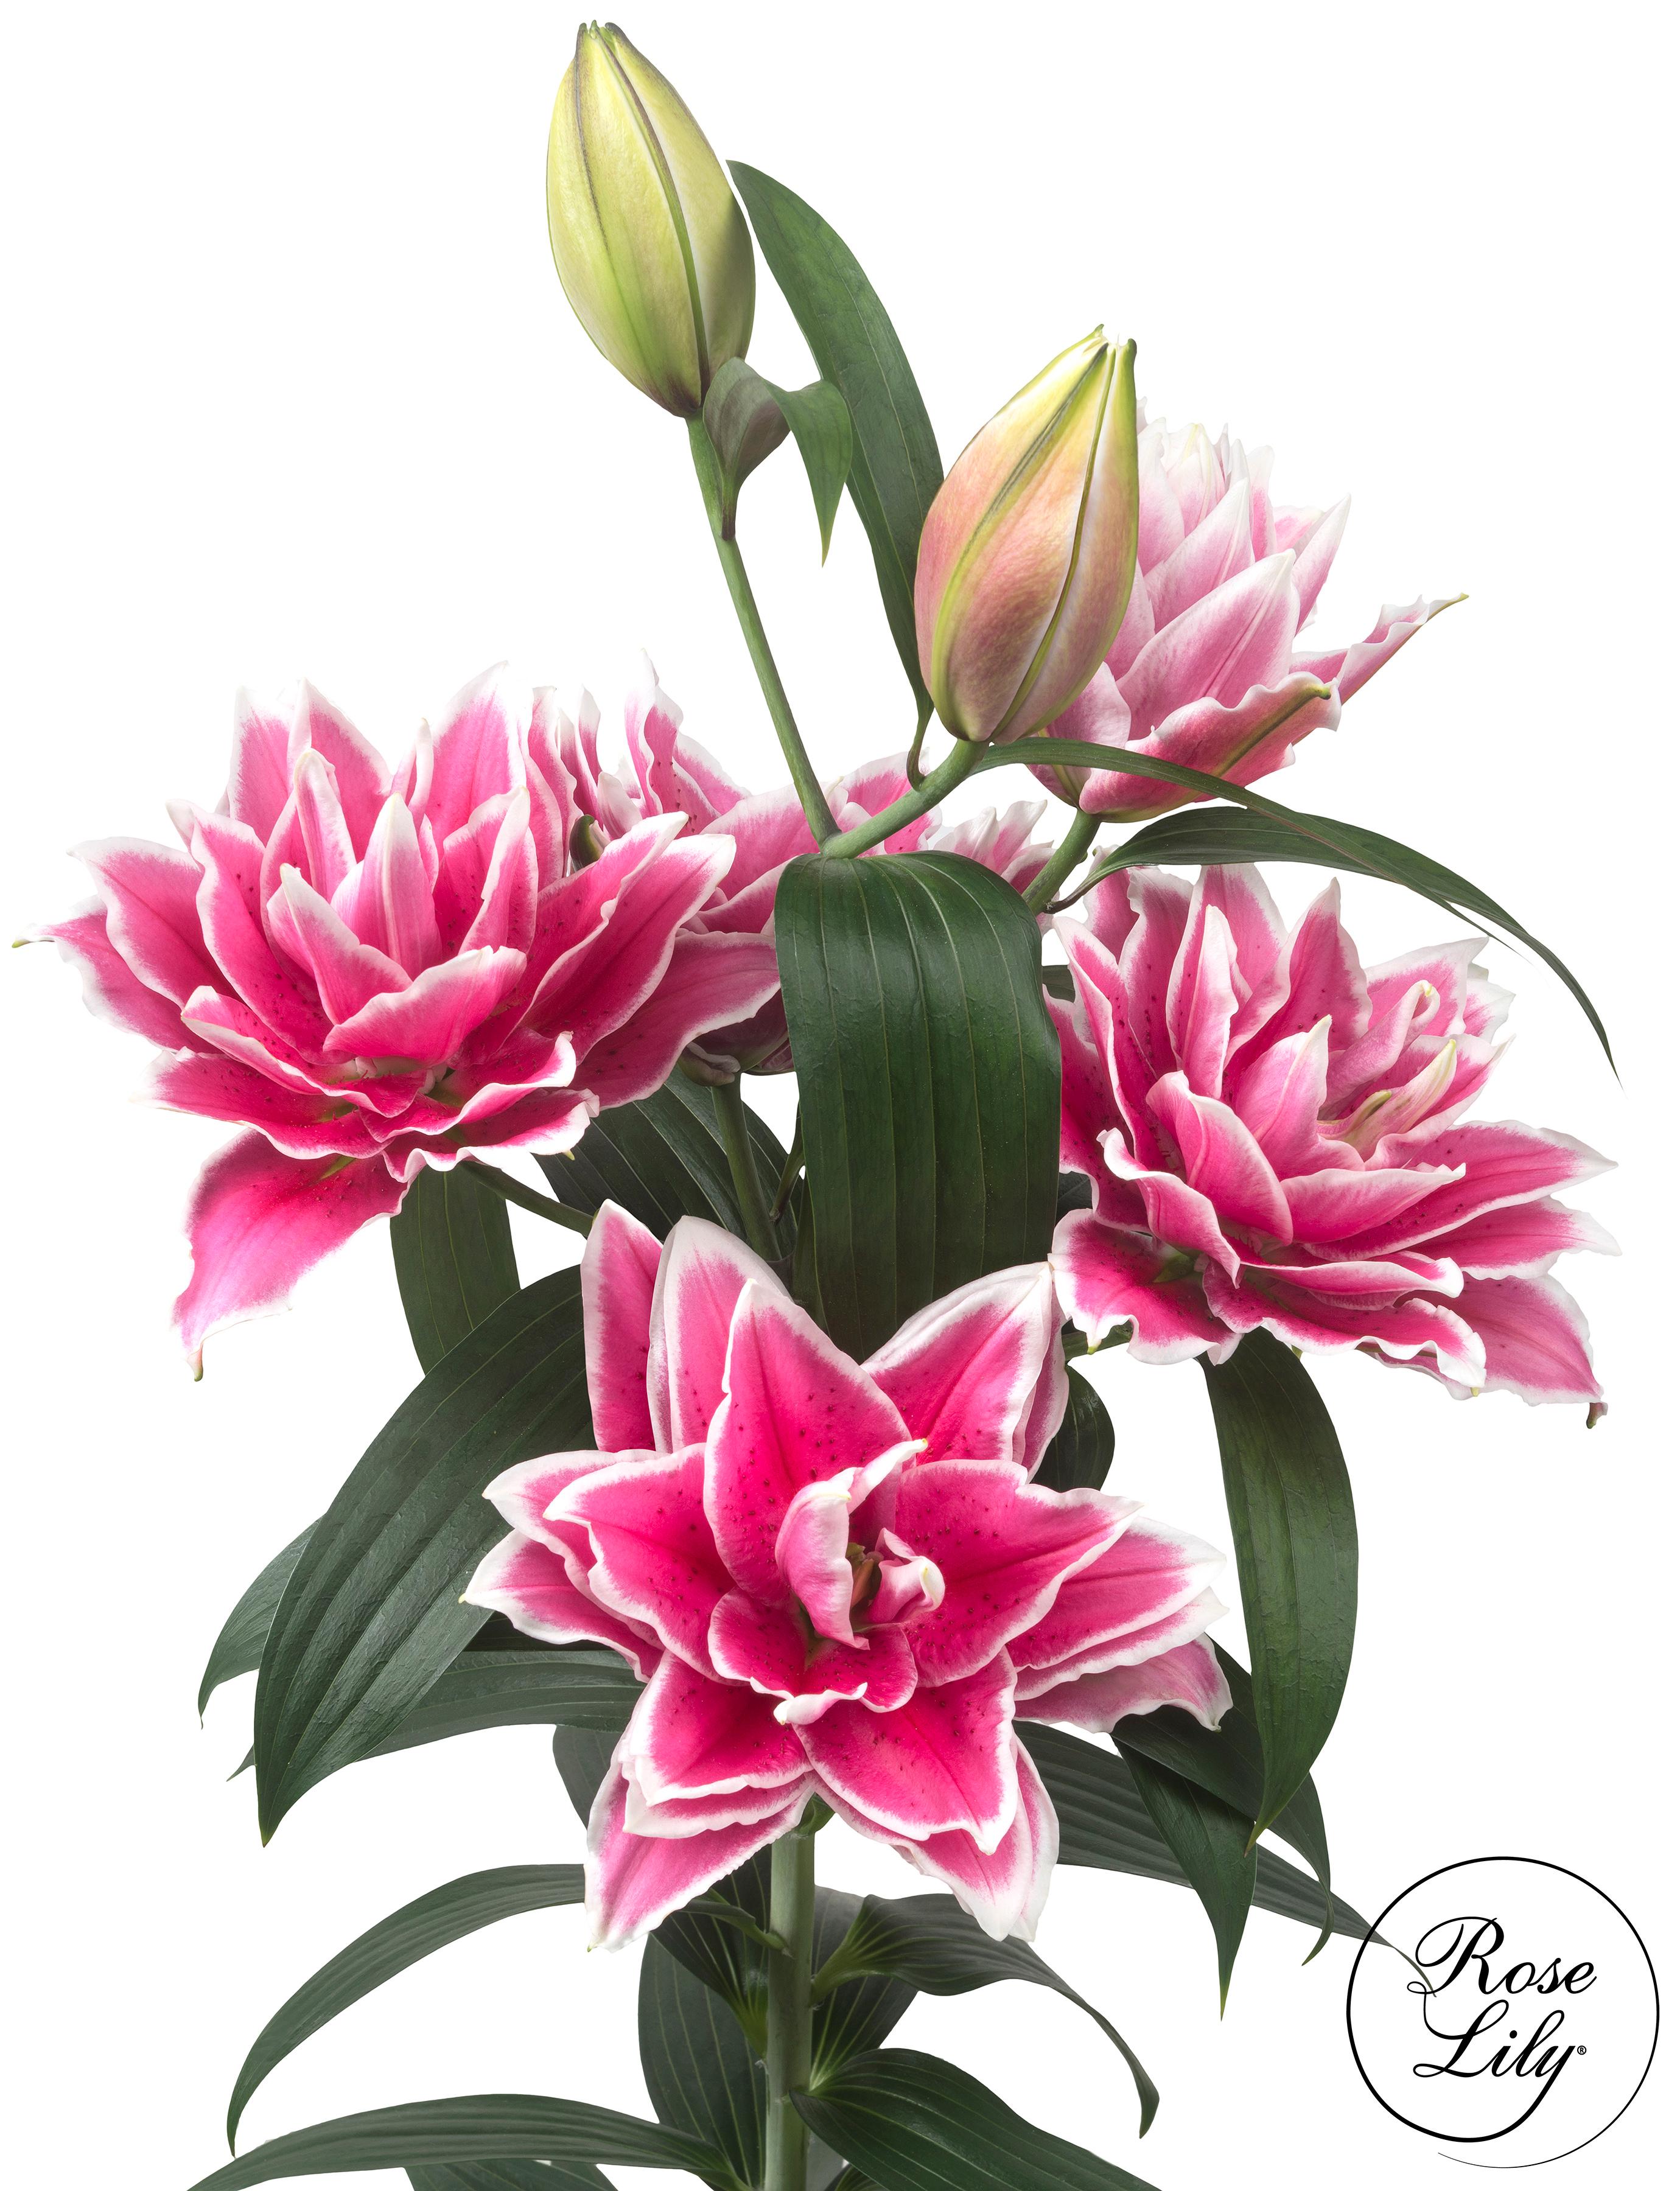 Lilies Double Oriental 'Roselily Samantha' - Double Oriental Lilies from Leo Berbee Bulb Company